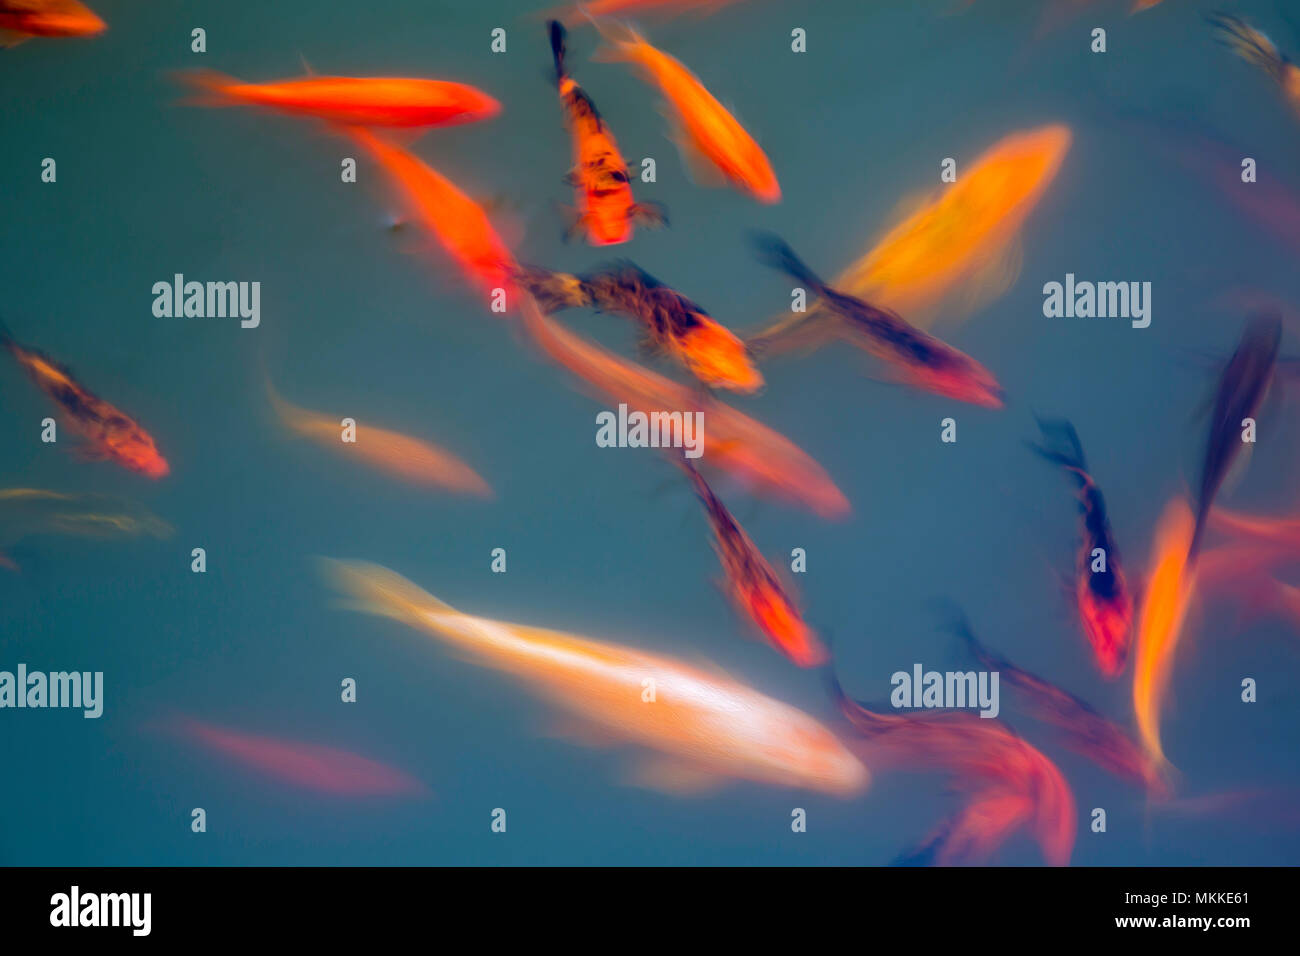 A motion blurred image of ornamental koi fish, Cyprinus carpio, at one of the ponds in the Buddha Eden Garden, Carvalhal, Portugal. Stock Photo